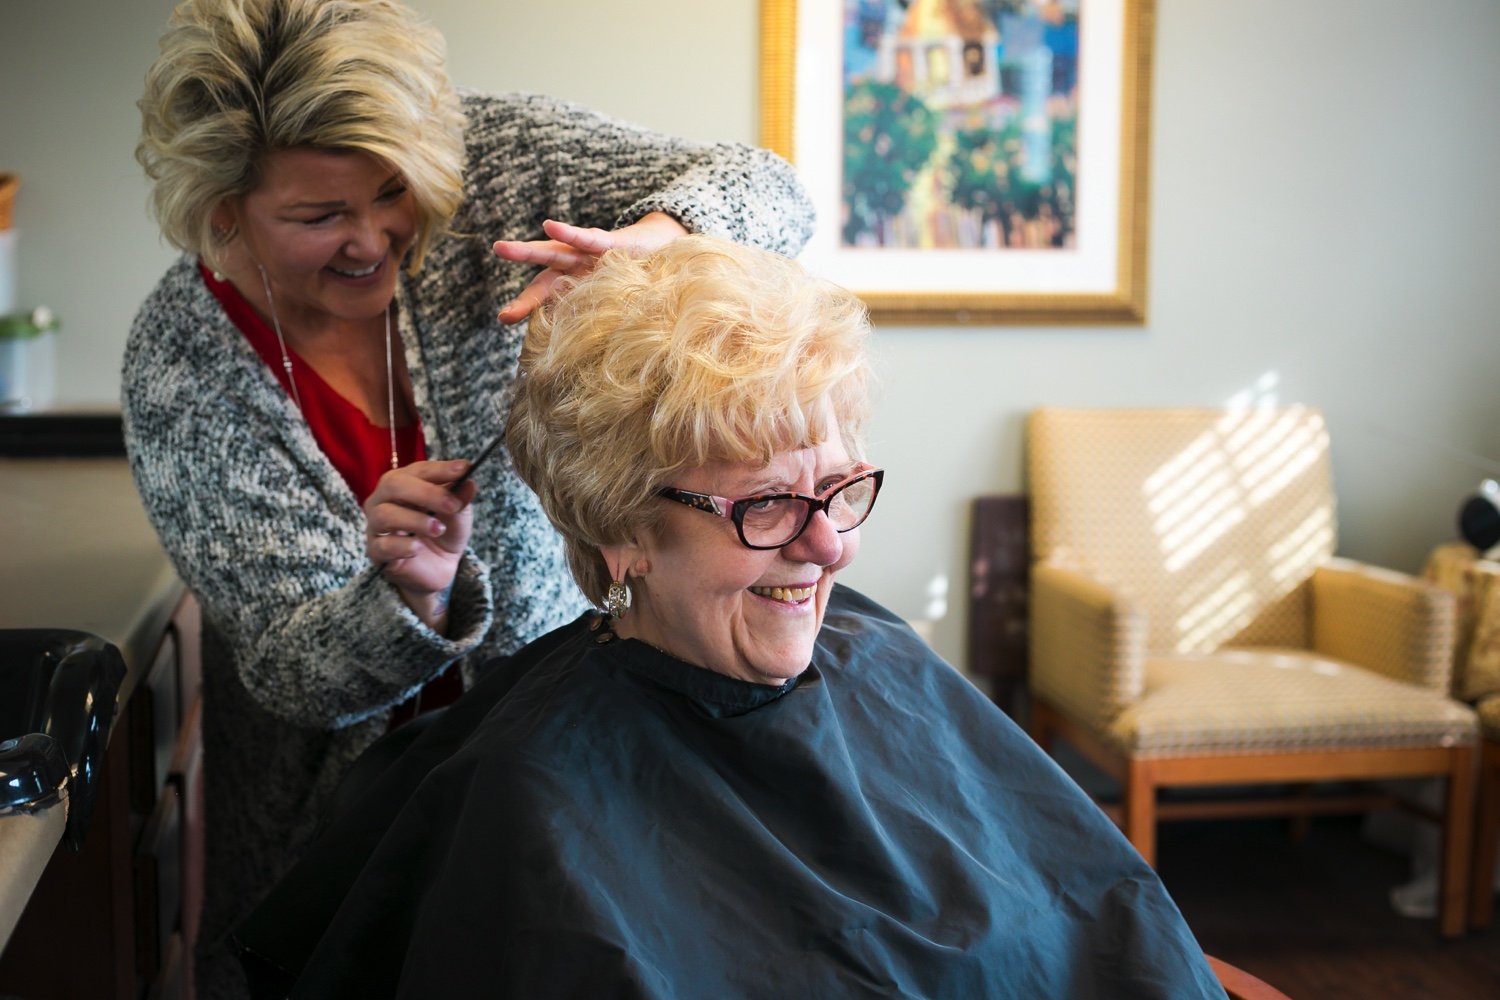 Senior community resident woman smiling while receiving a haircut.